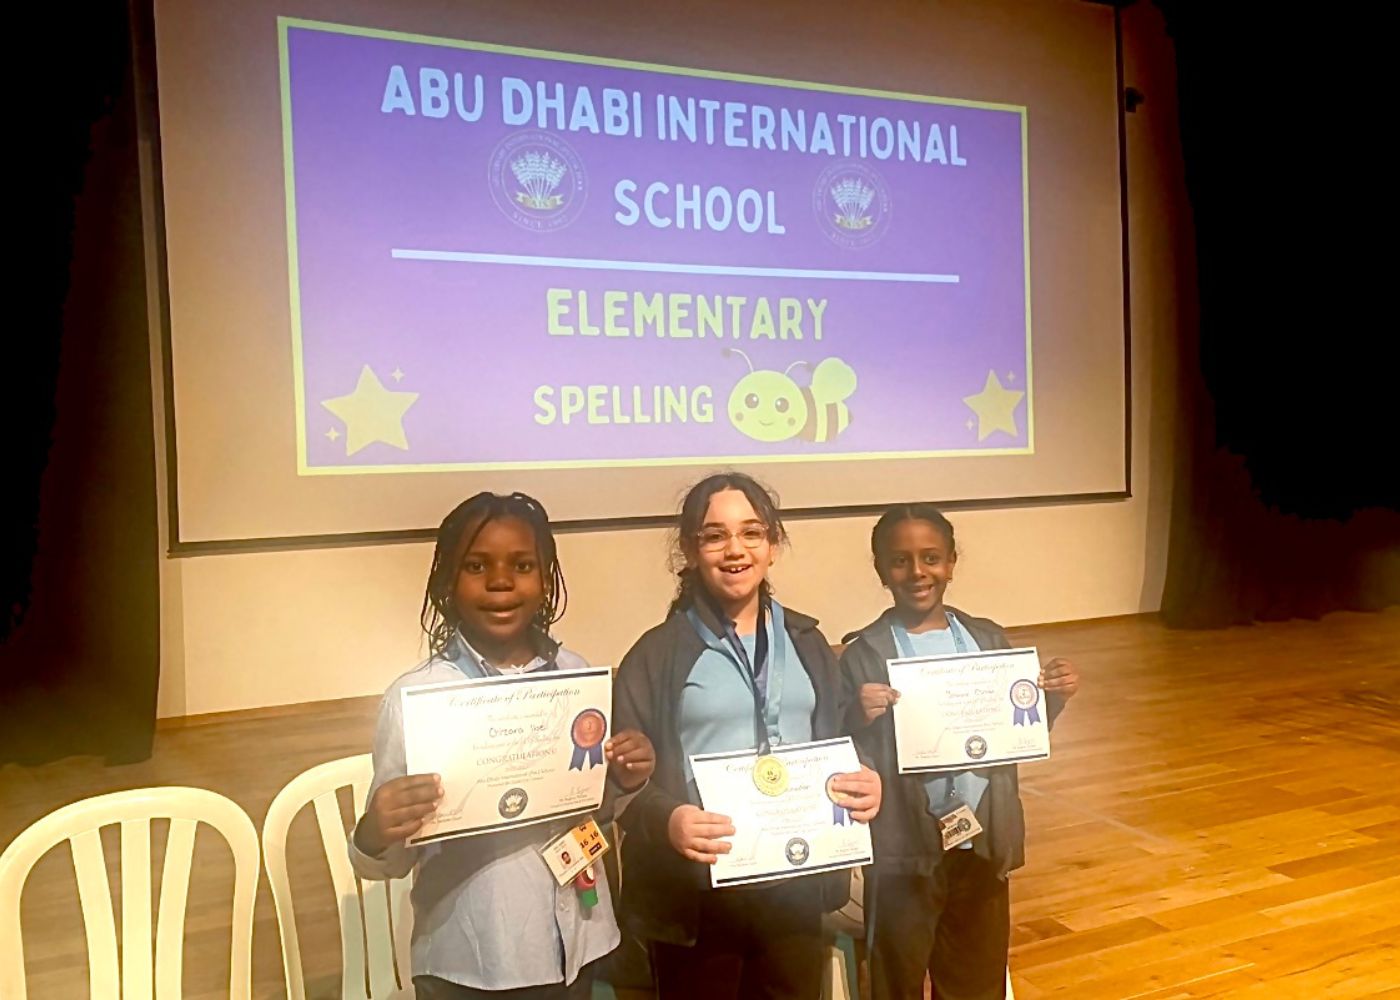 Elementary students of Abu Dhabi International School at the Spelling Bee event